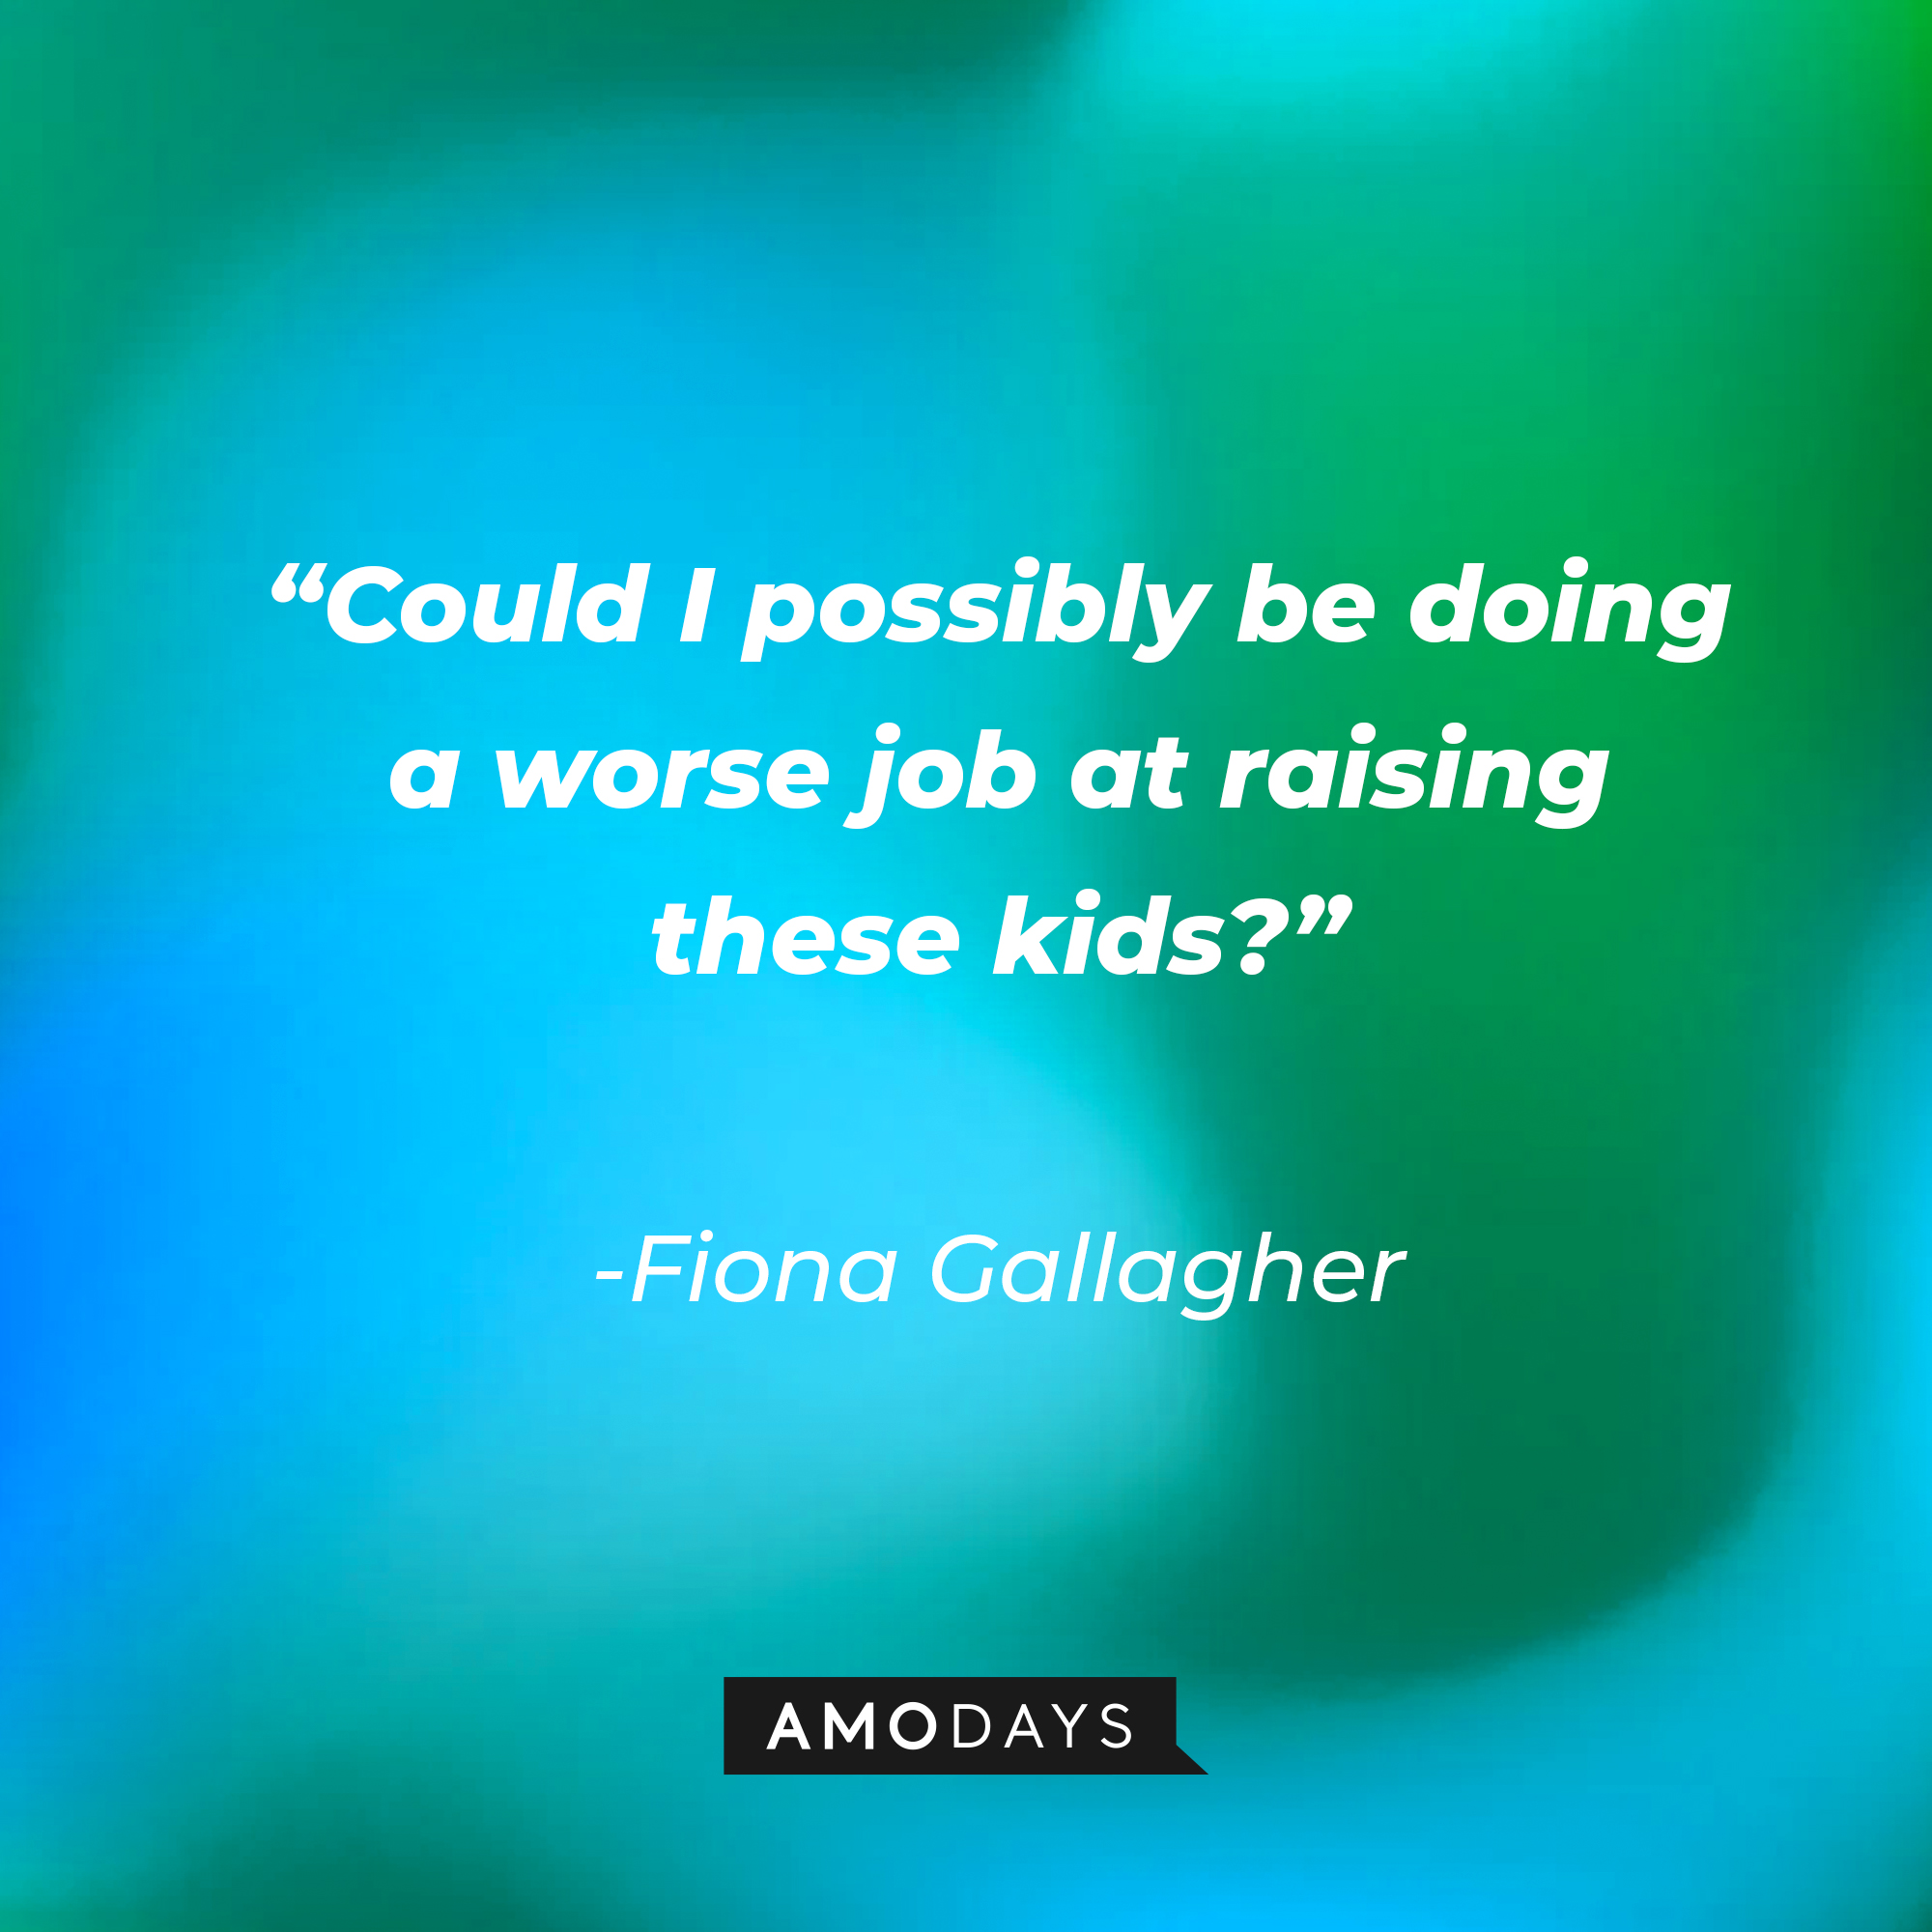 Fiona Gallagher’s quote: “Could I possibly be doing a worse job at raising these kids?” | Source: AmoDays